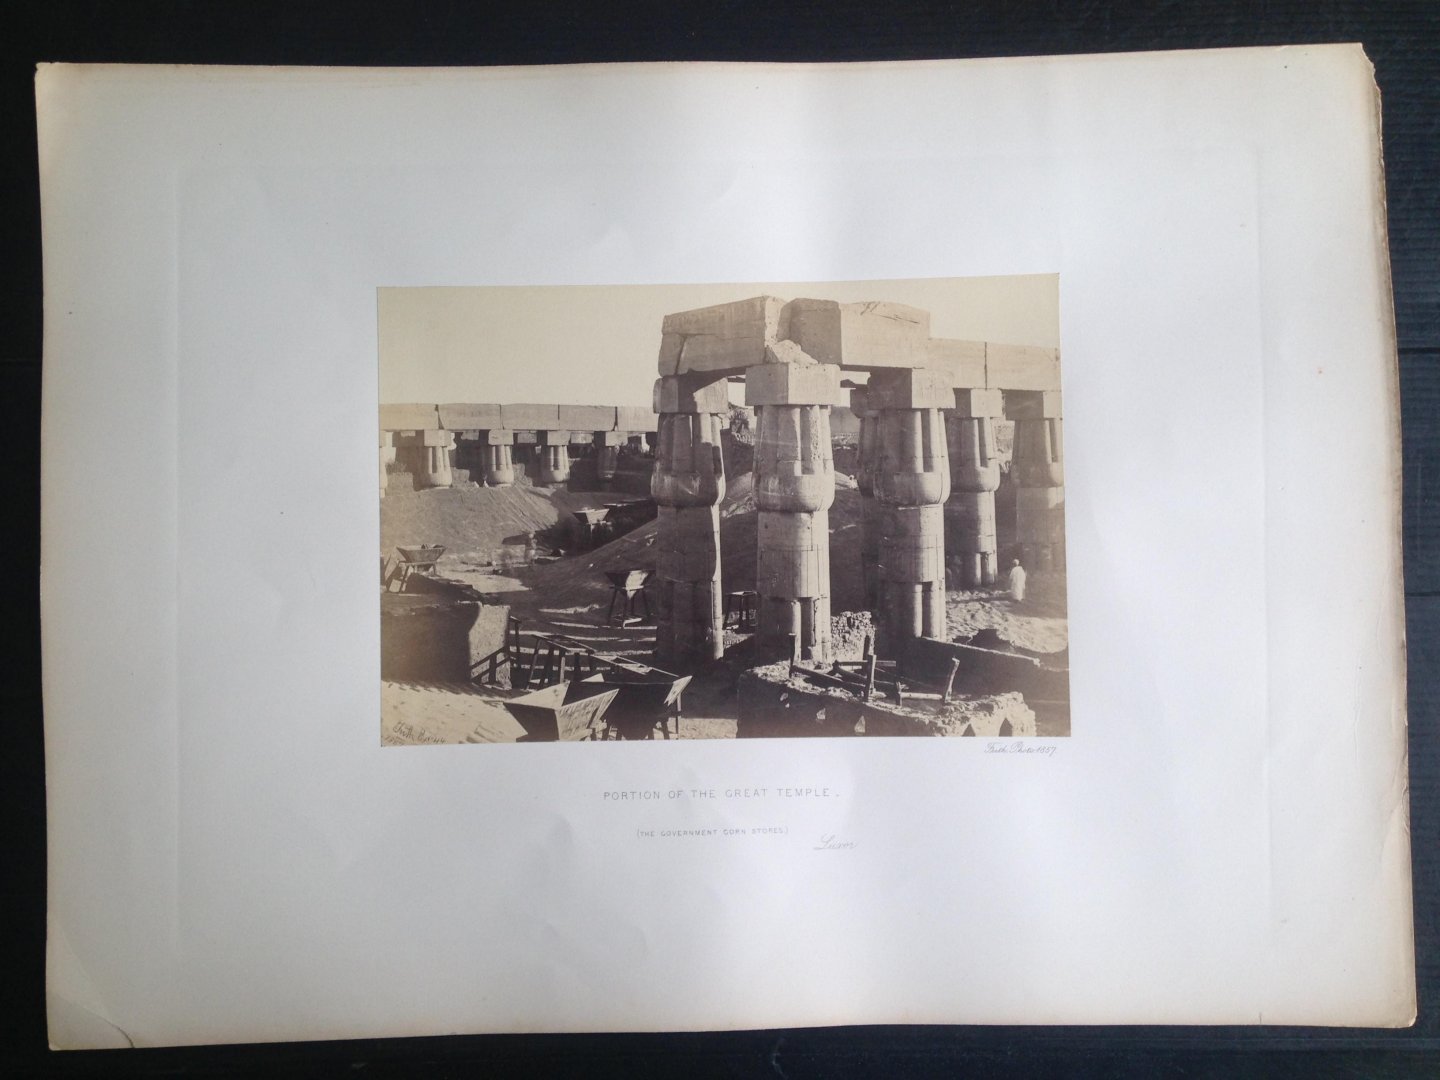 Frith, Francis - Portion of the Great Temple [The Government Corn Stores], Luxor, Series Egypt and Palestine